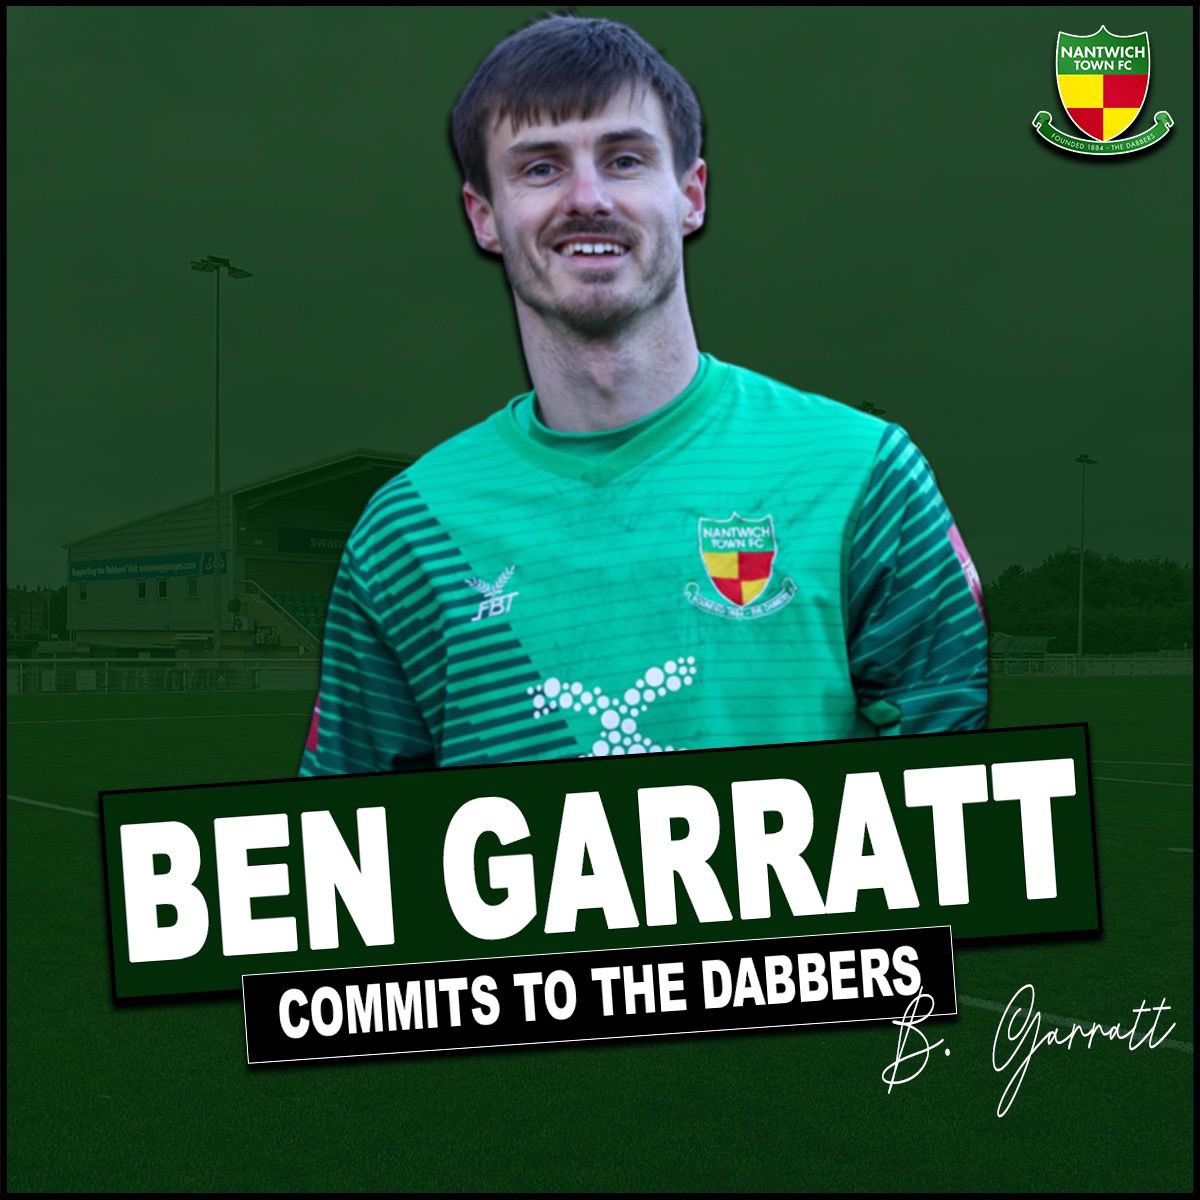 ✍️ | Nantwich Town are delighted to confirm that Ben Garratt has signed a 2-year deal to remain with The Dabbers 🤝

Great to have you with us, Ben! 👊

More here 👉 tinyurl.com/3v25t2fb

#UpTheDabbers💚